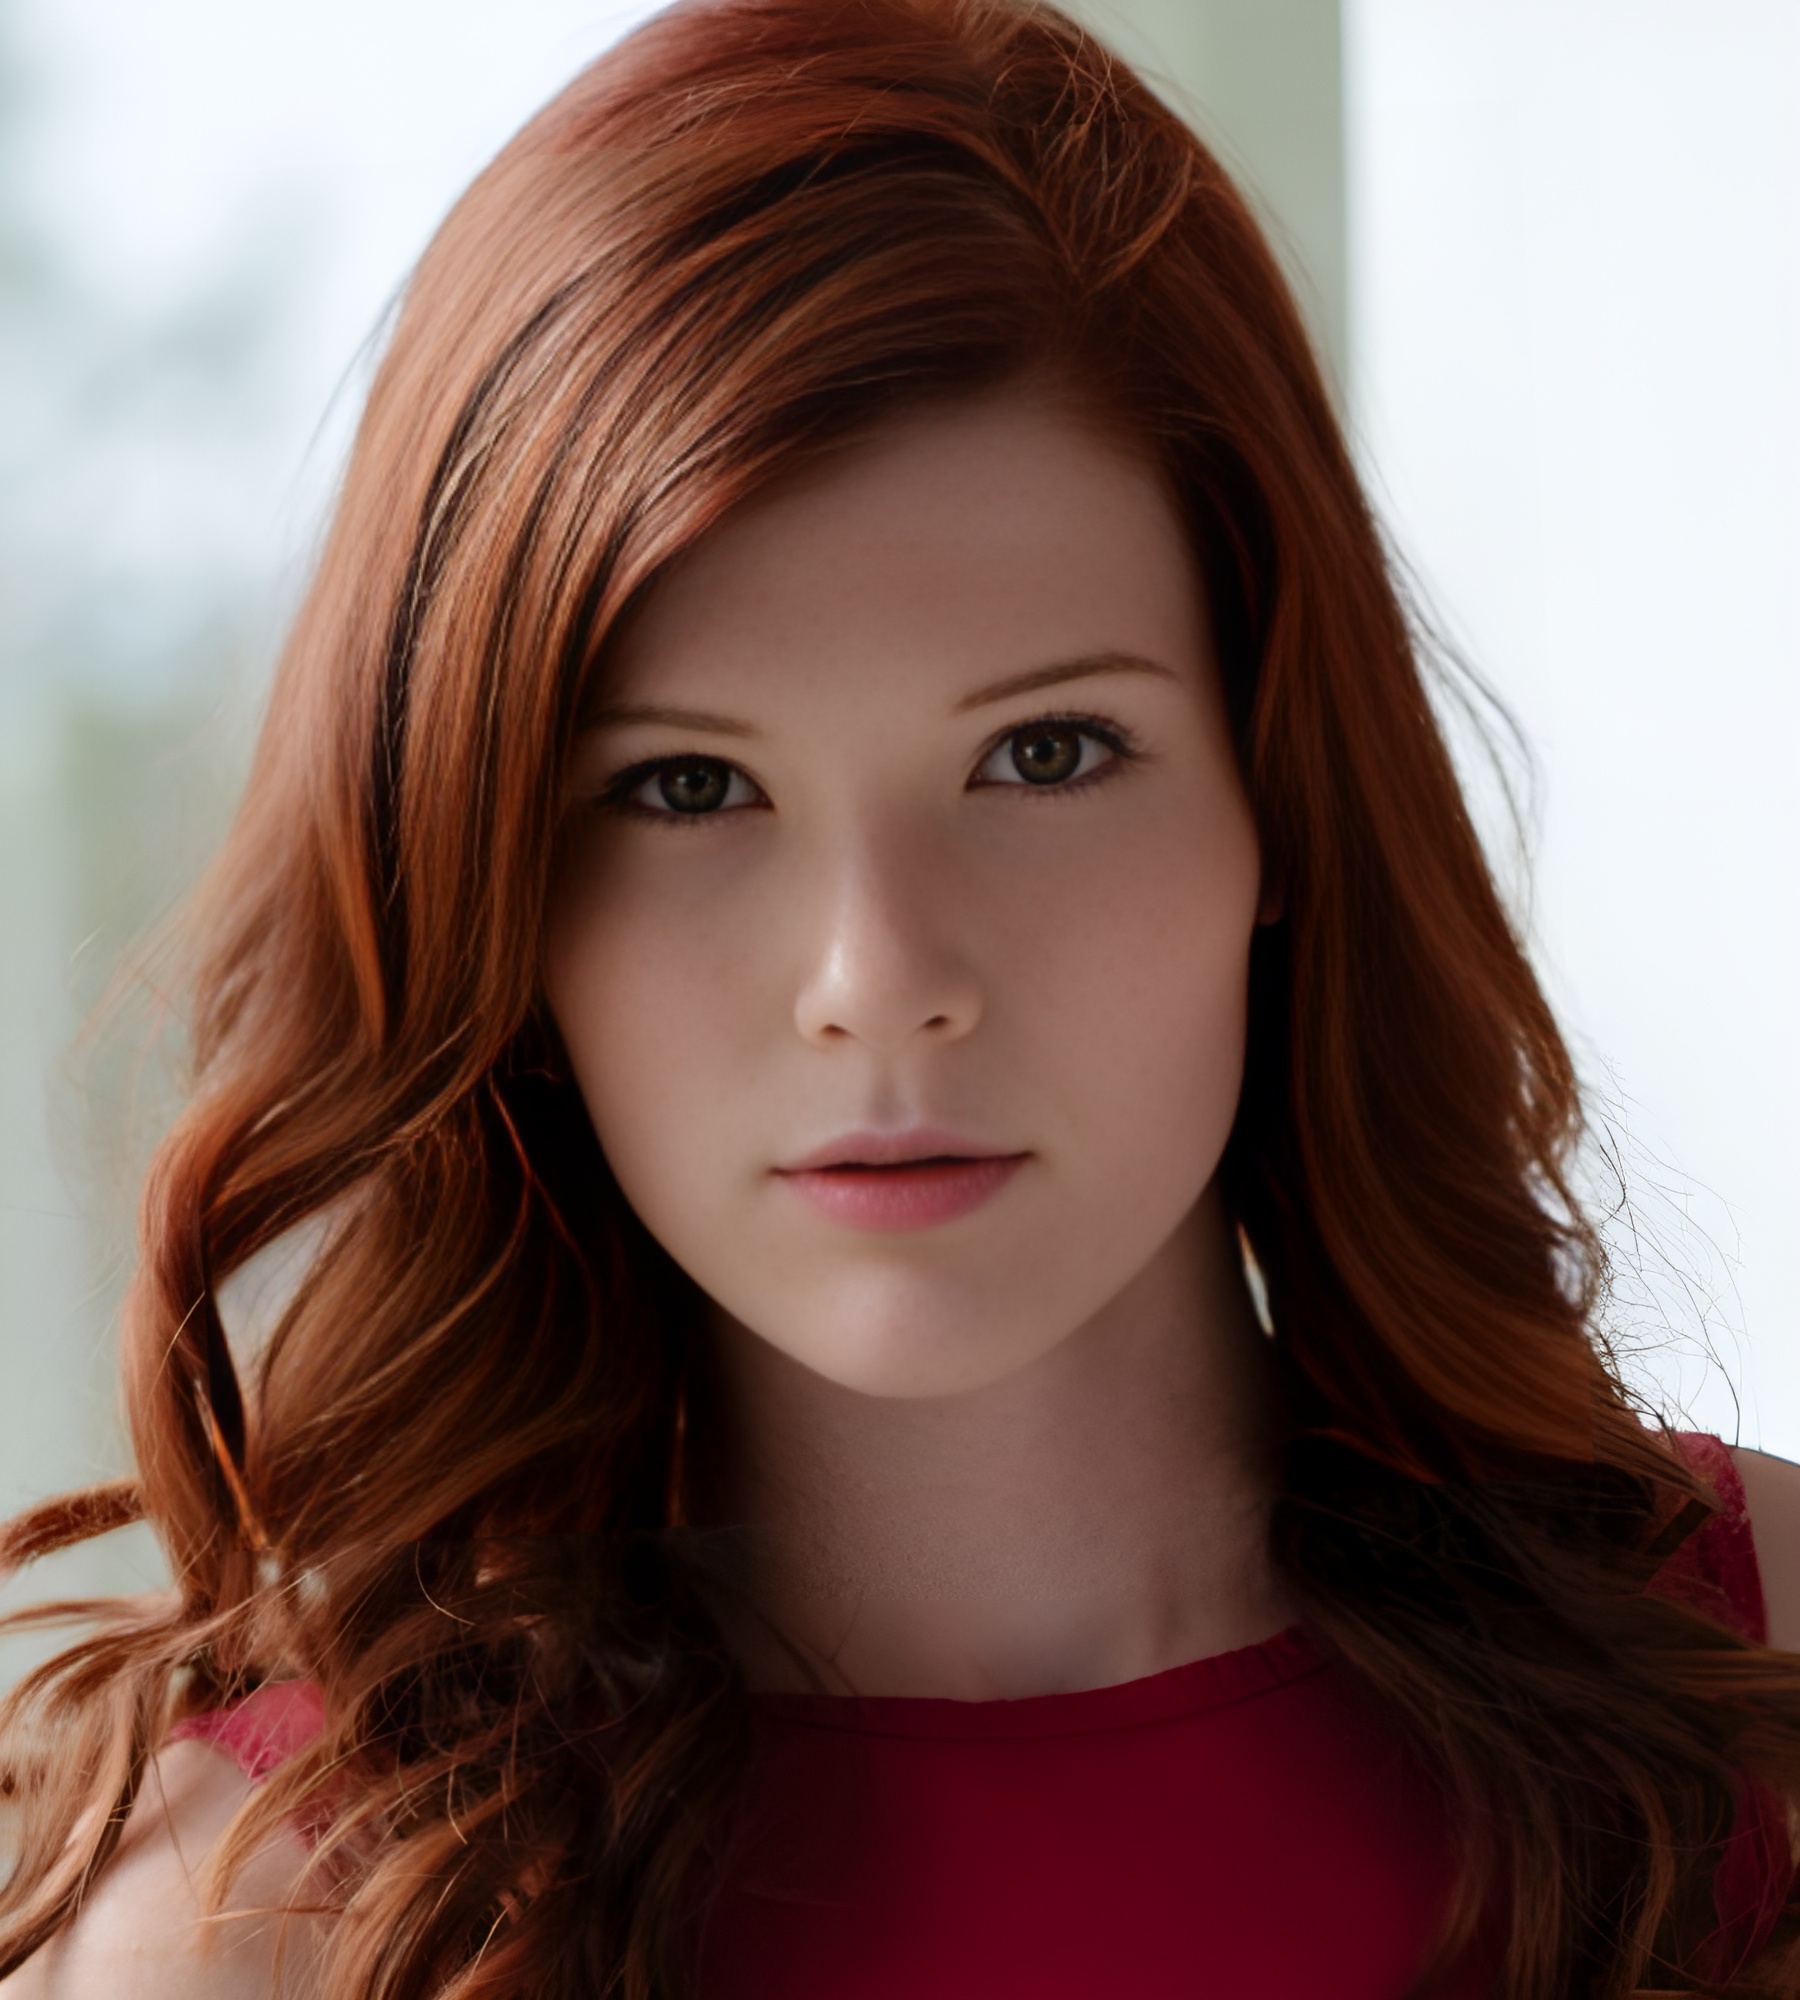 Mia Sollis (Actress) Age, Videos, Photos, Biography, Boyfriend, Height, Weight, Wiki and More